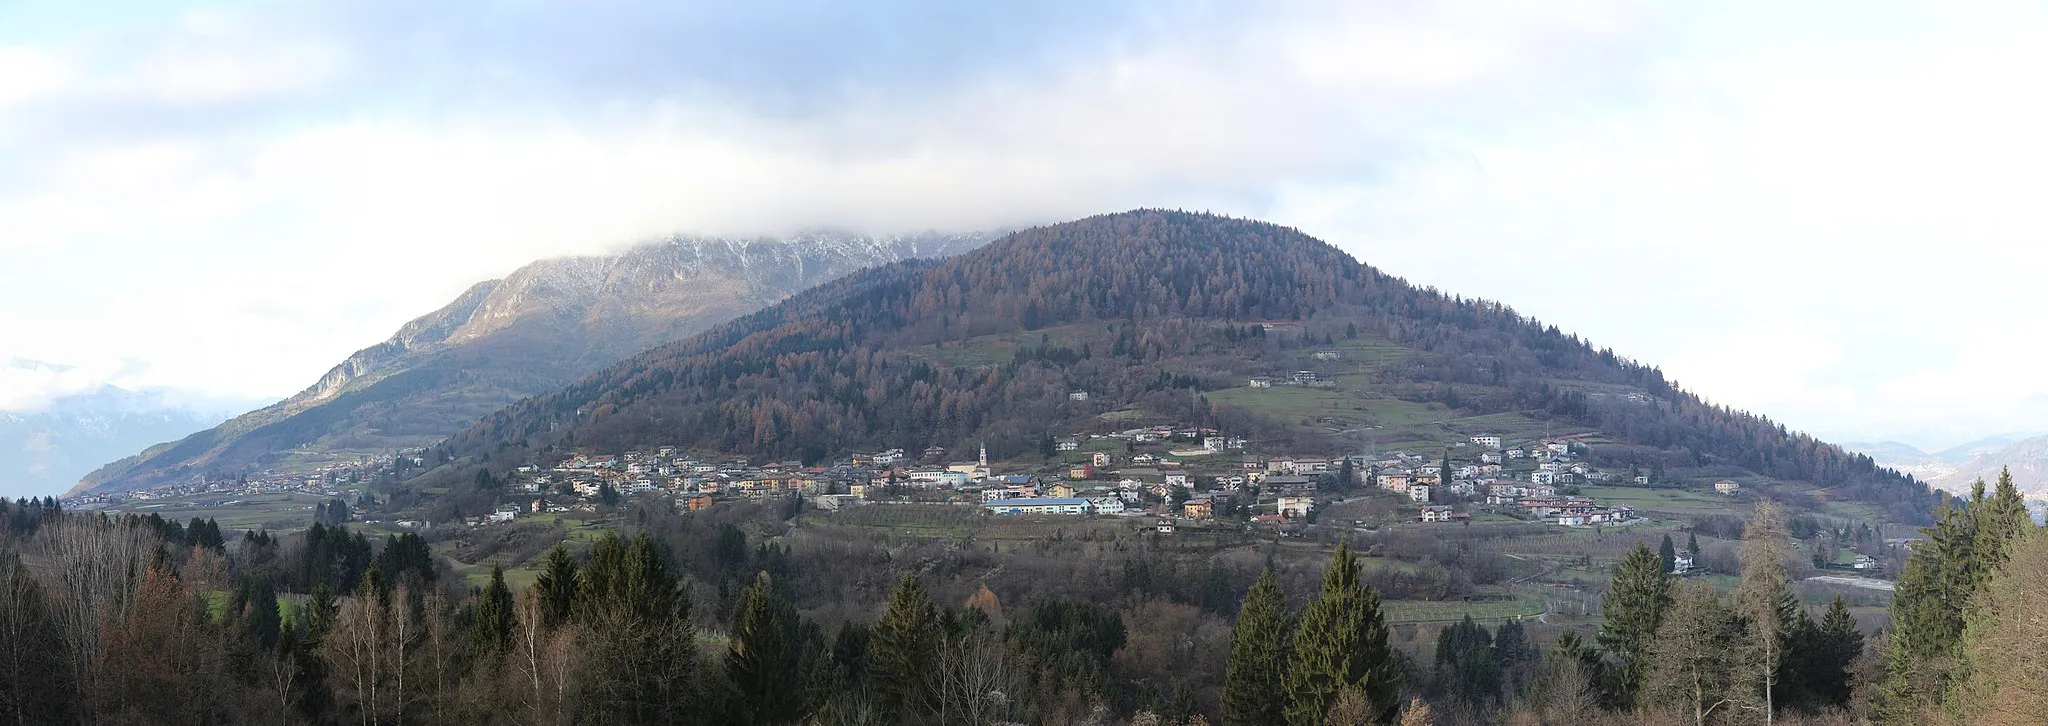 Photo showing: Bosentino (Italy): panorama of Bosentino from the road connecting the village of Campregheri (in the municipality of Centa San Nicolò) with the municipality of Calceranica al Lago.